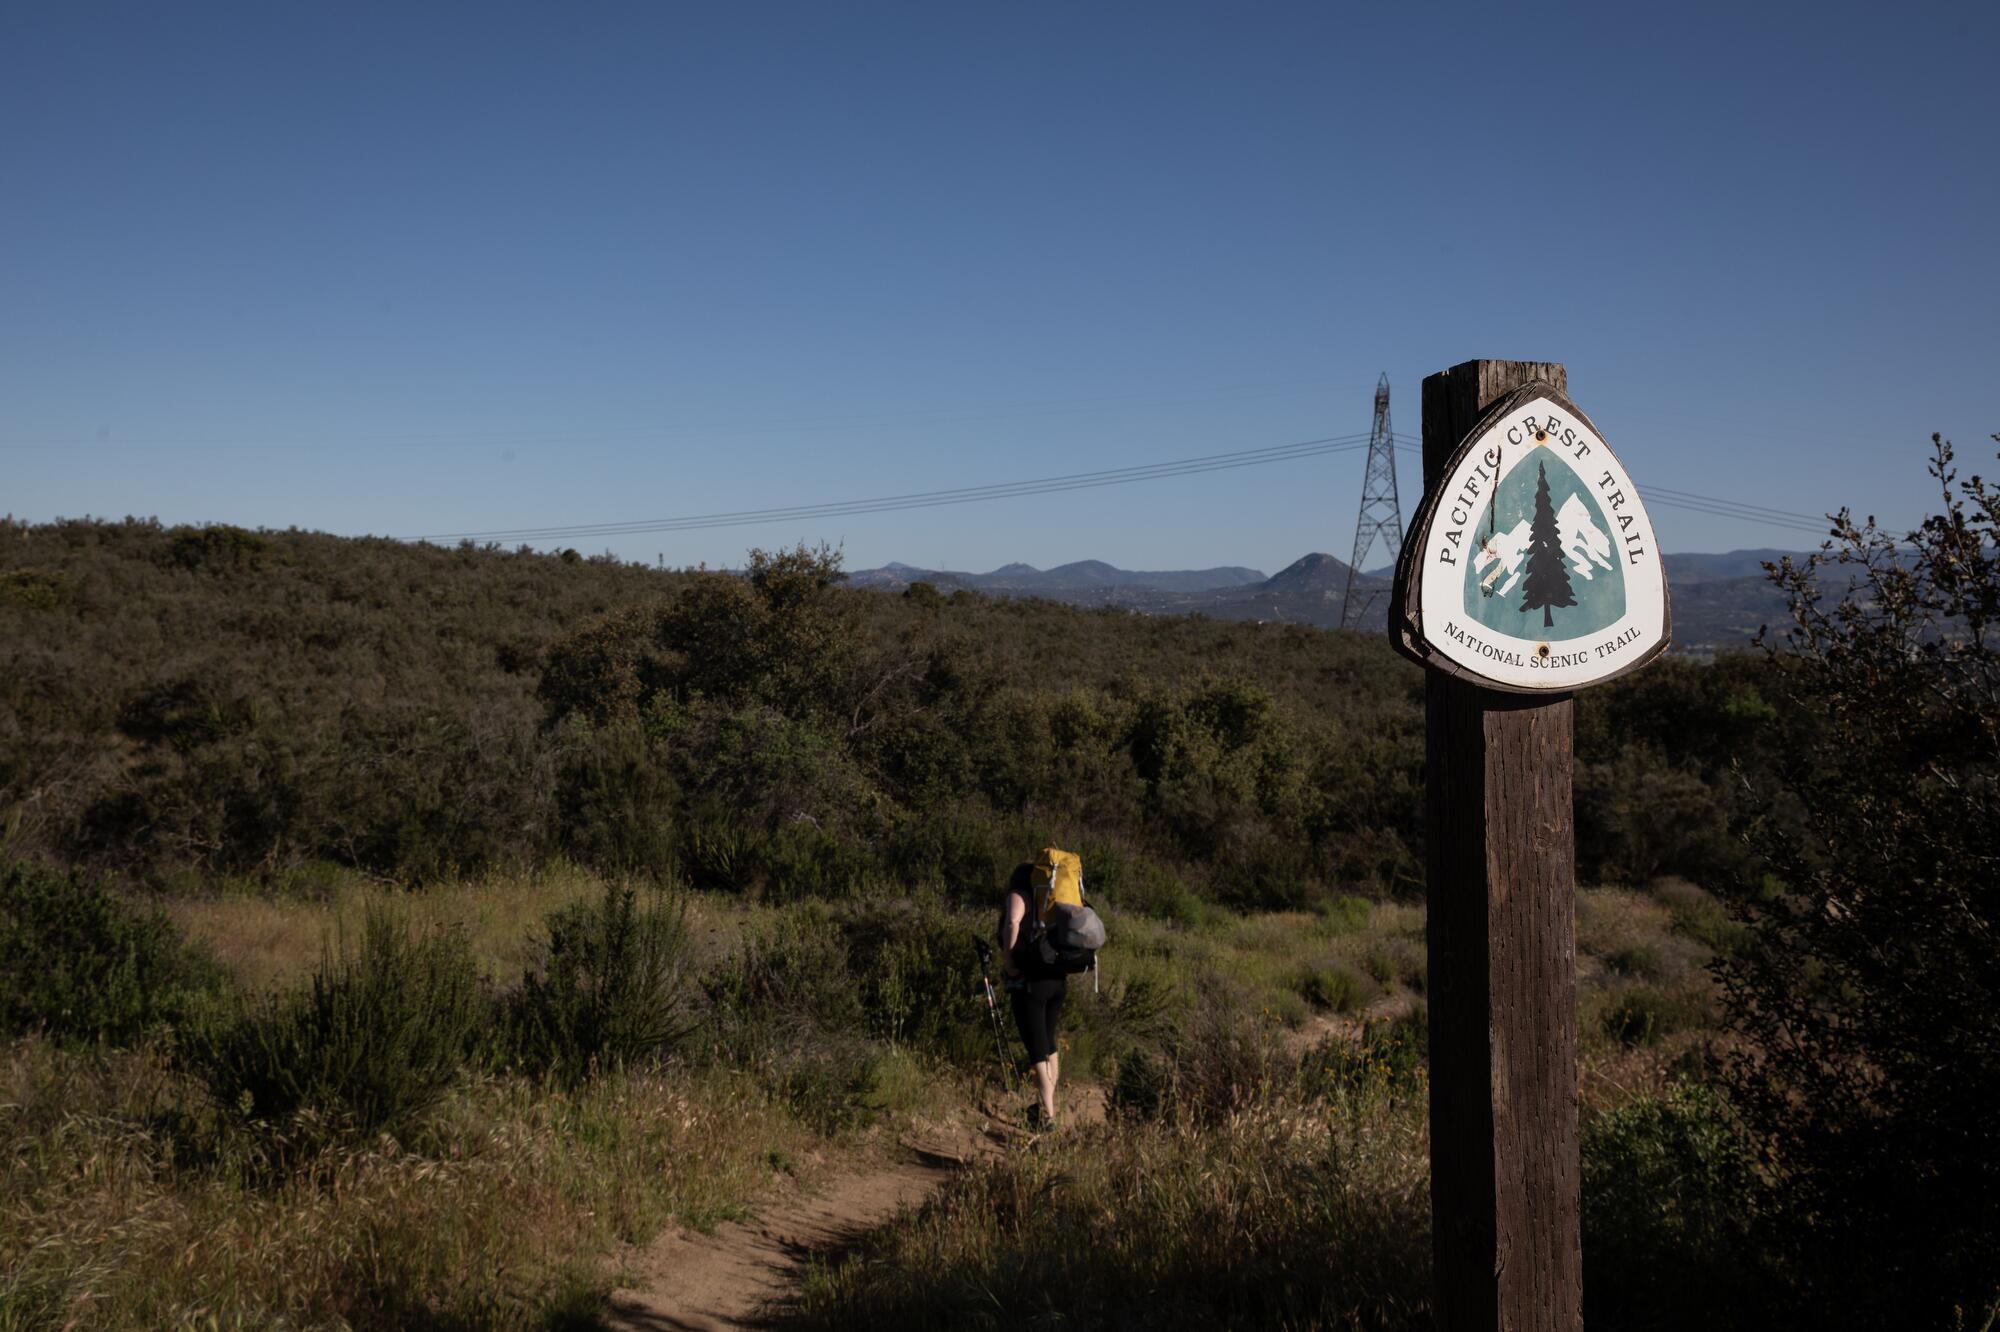 Hikers begin their journey of more than 2,600 miles at Camp Lockett Event & Equestrian Facility